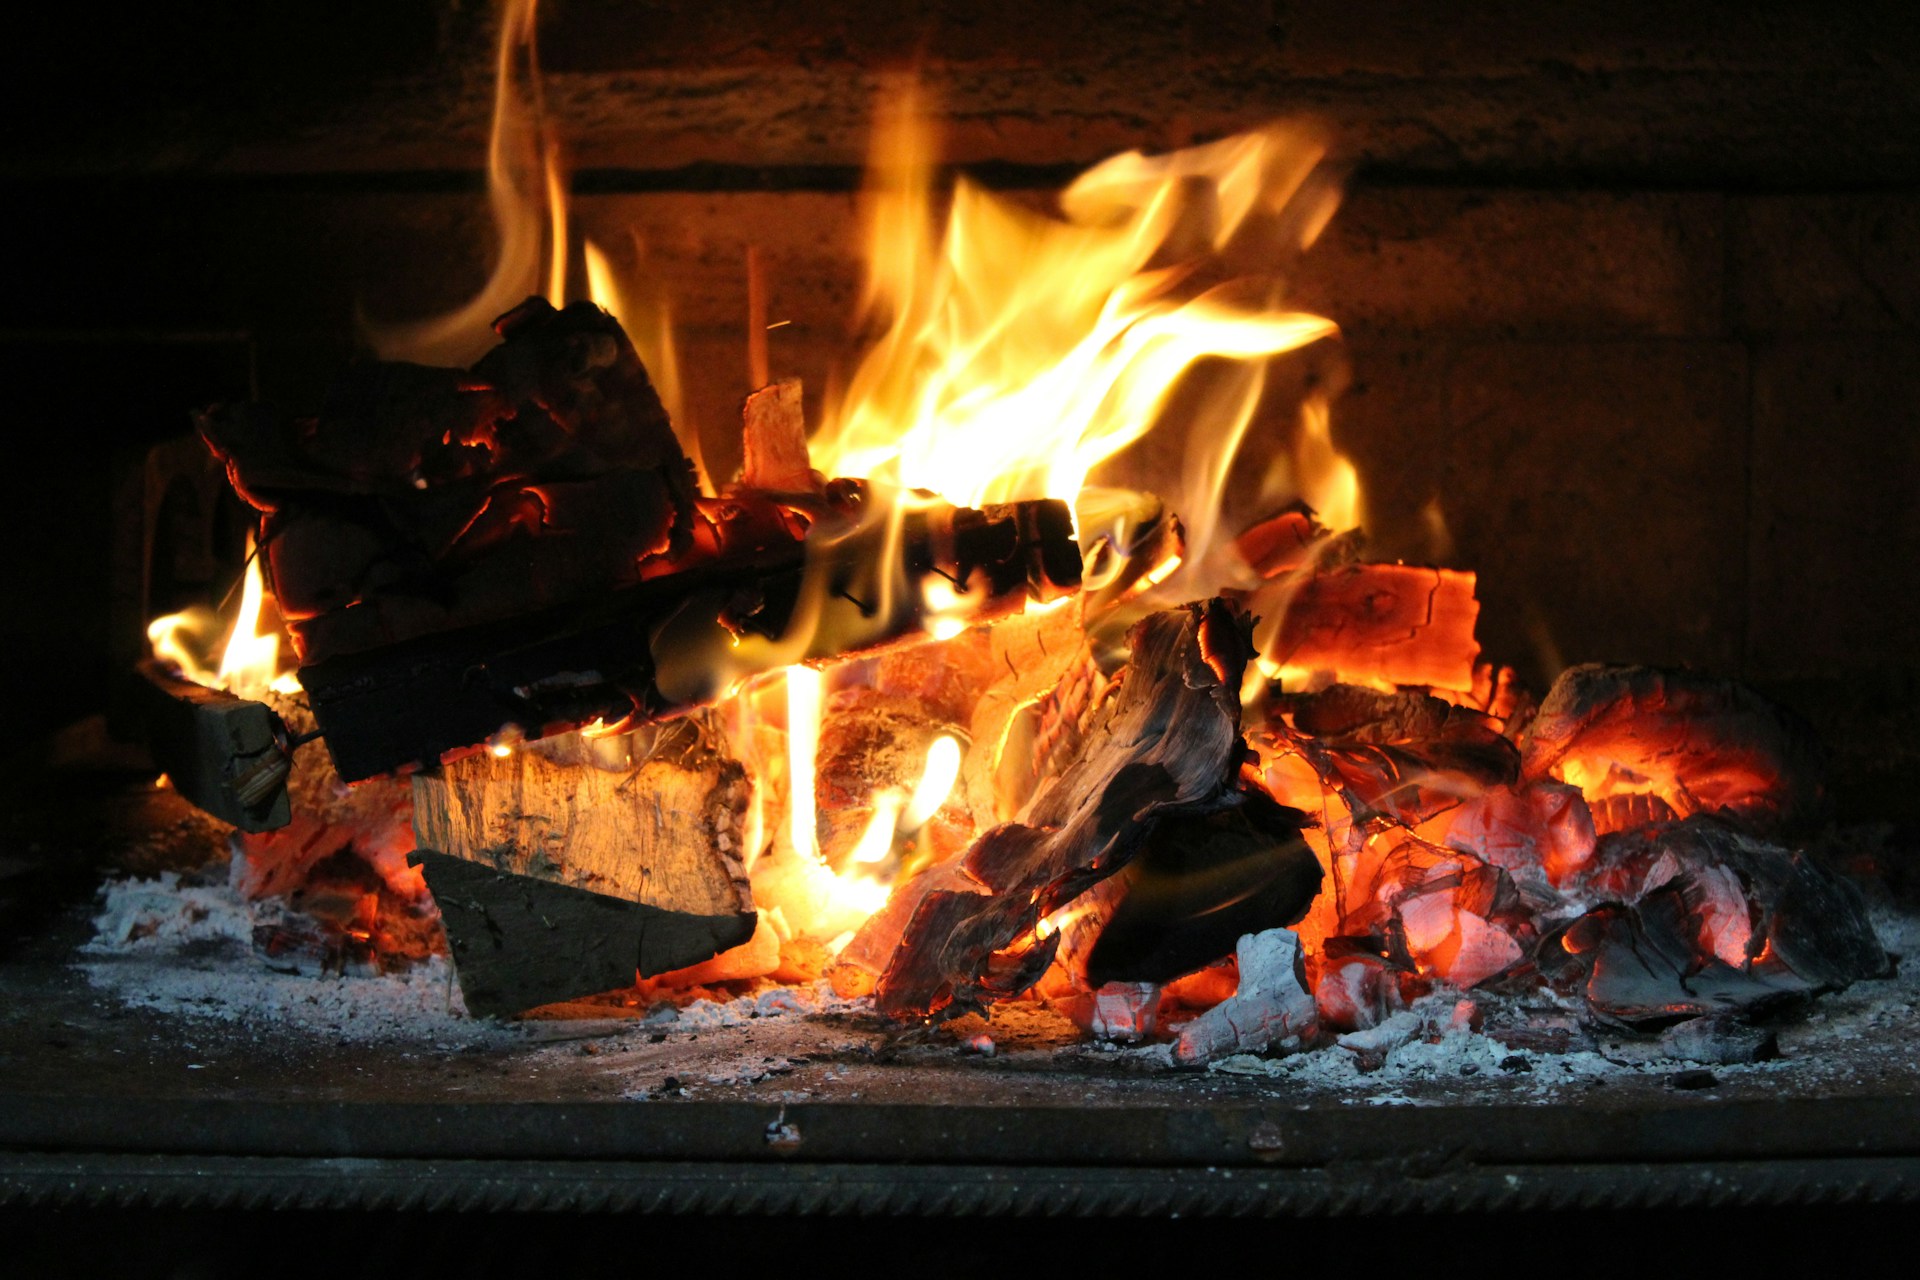 Logs burning in a fireplace